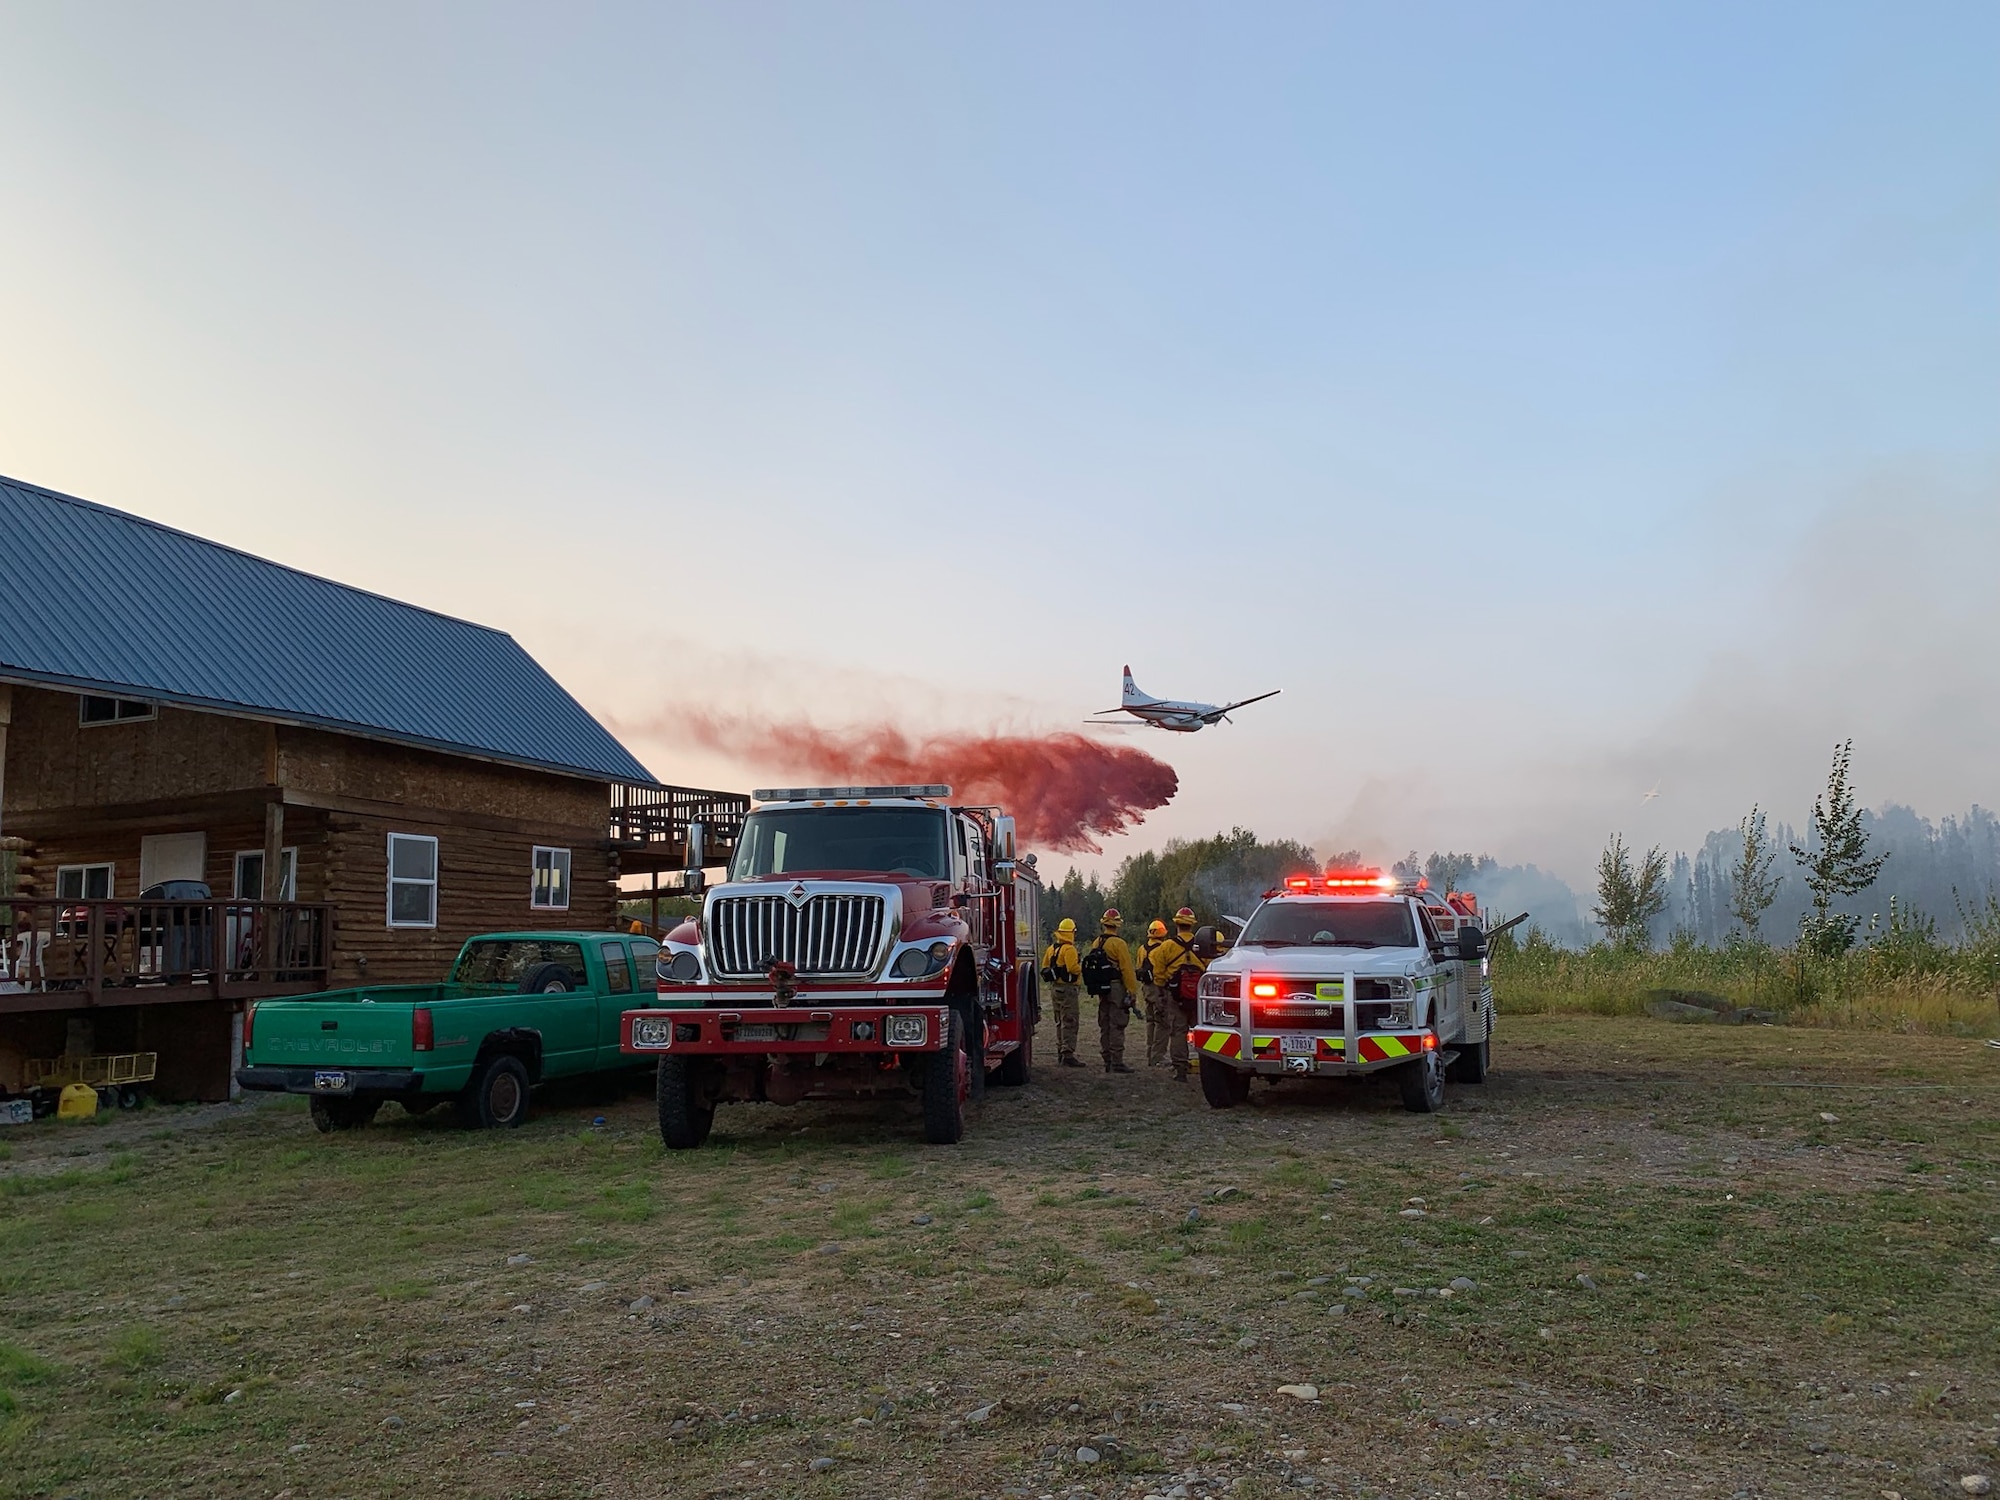 Joint Base Elmendorf-Richardson firefighters wait to re-engage fire suppression efforts while a Candian aircraft drops flame retardant on the McKinley Fire near mile marker 90.5 along the Parks Highway in Alaska, Aug. 18, 2019. The Matanuska-Susitna area fire management officer requested assistance from the JBER taskforce, which immediately responded and fought the fire alongside local and state firefighters.